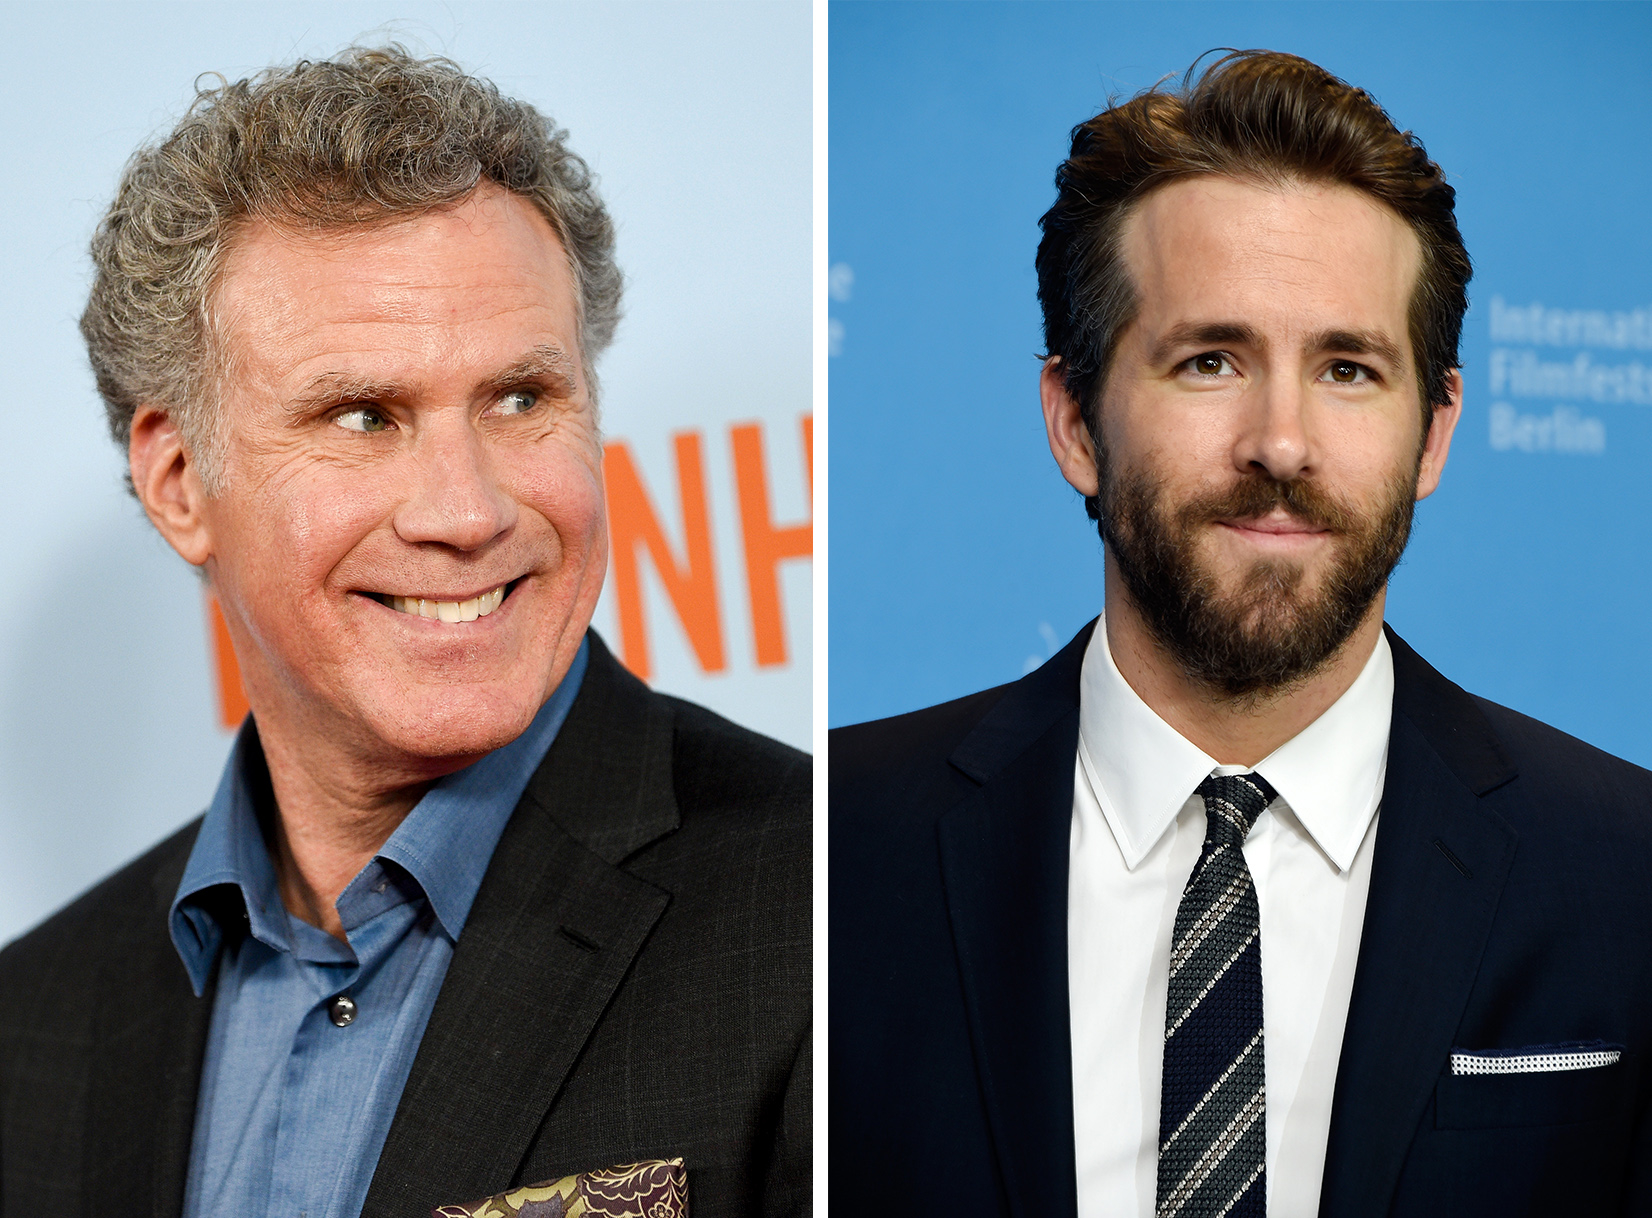 Ryan Reynolds' Heist Comedy Film Finds Streaming Home After